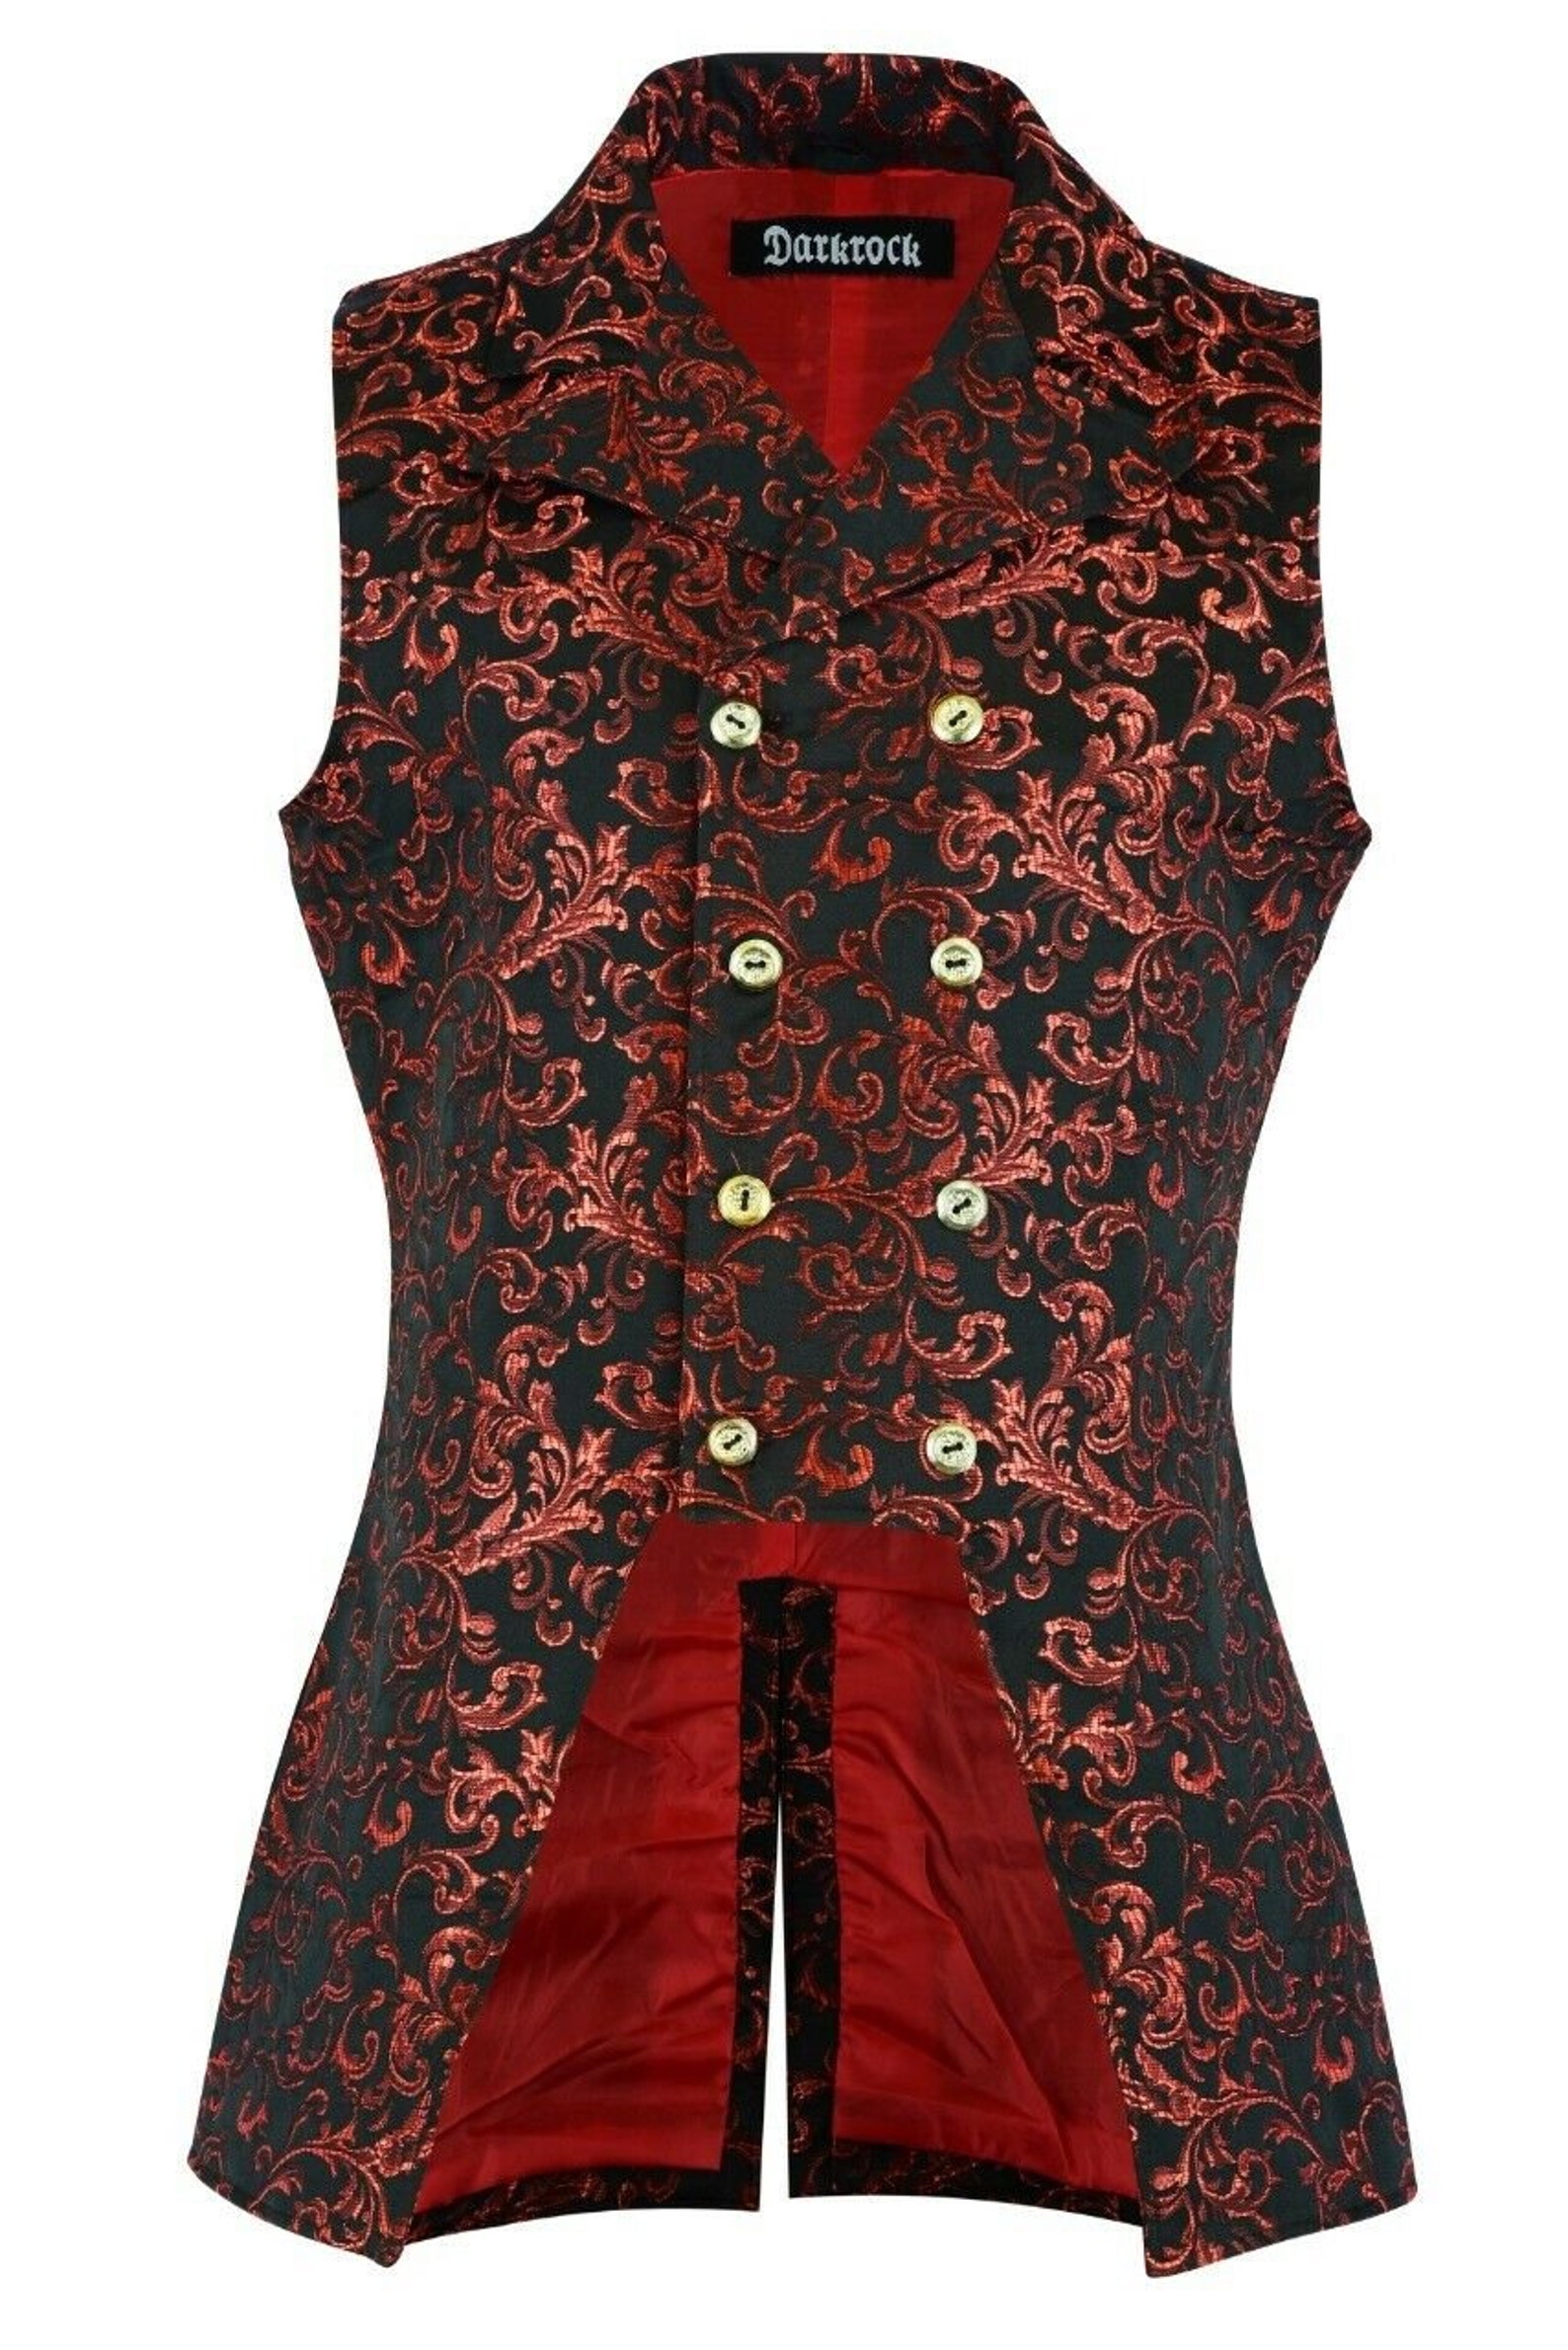 Men's Double Breasted Red Brocade Tapestry Governor Vest - Etsy